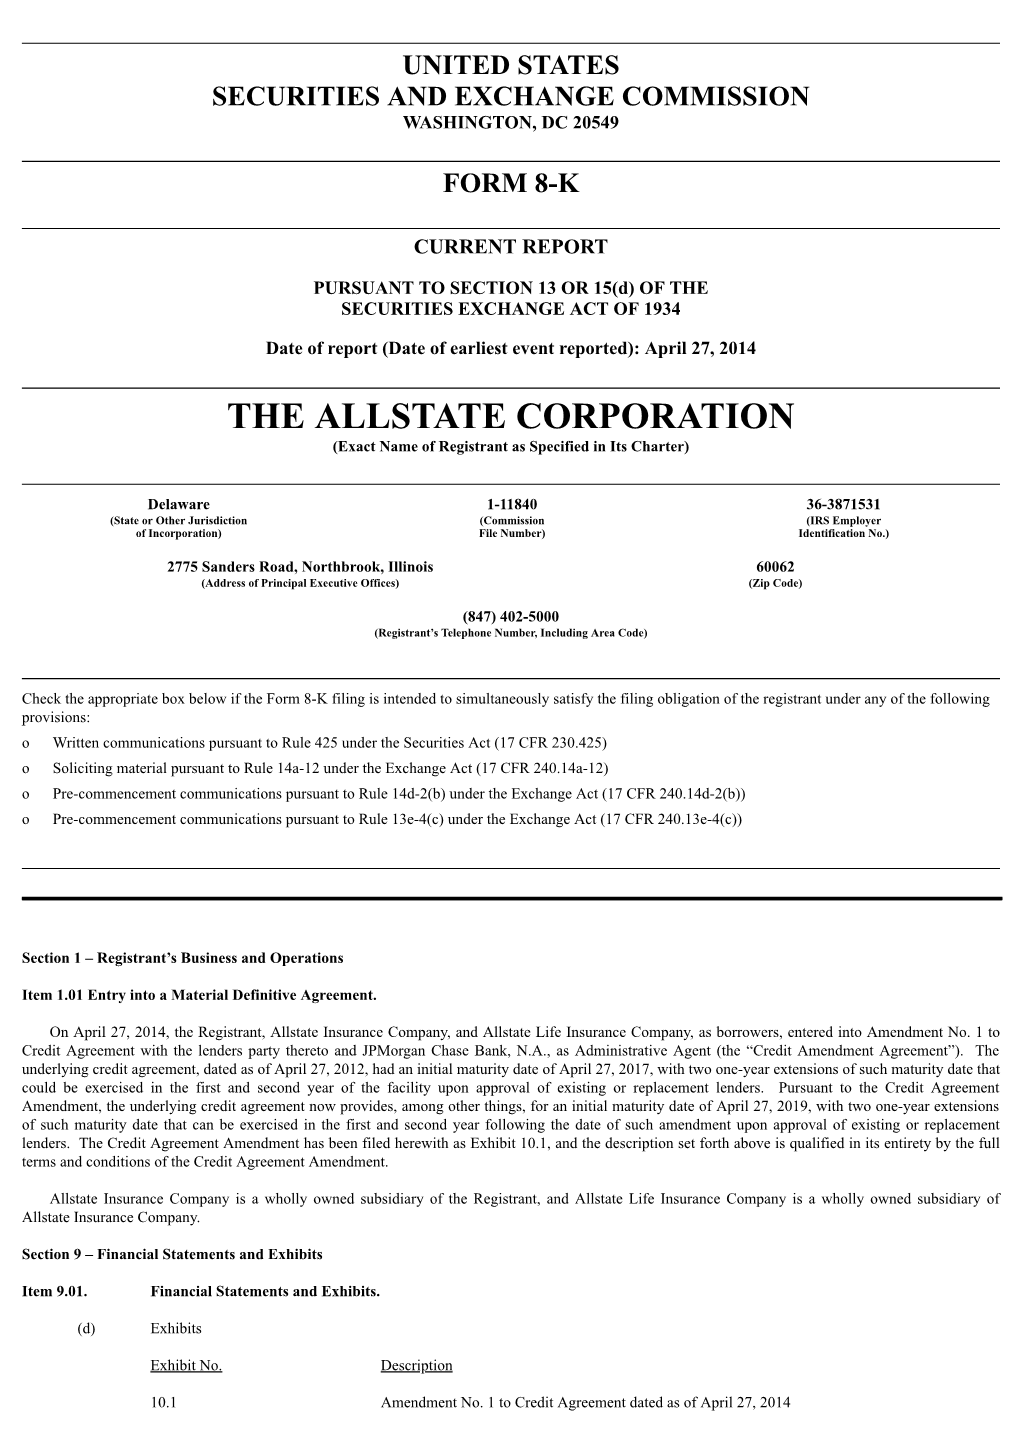 THE ALLSTATE CORPORATION (Exact Name of Registrant As Specified in Its Charter)